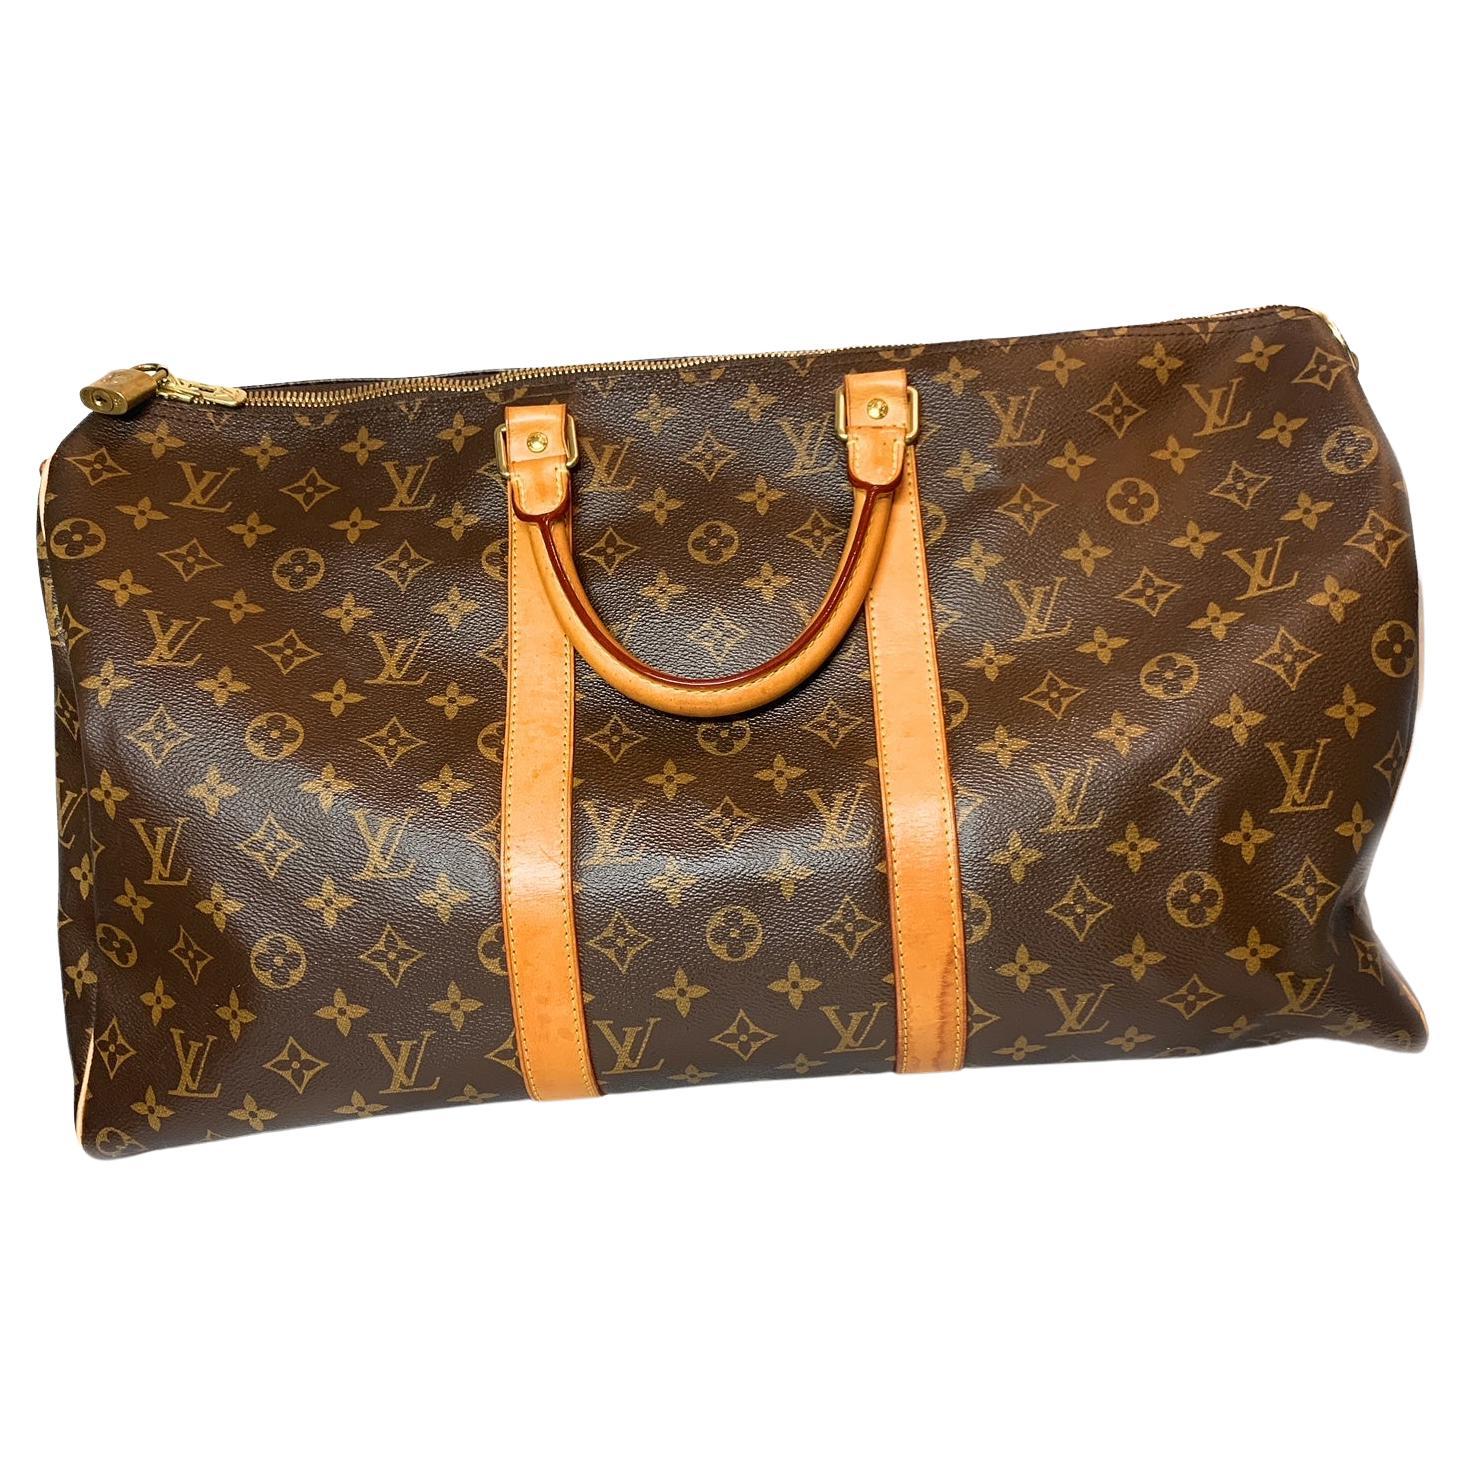 Vintage Louis Vuitton: Bags, Clothing & More - 12,951 For Sale at 